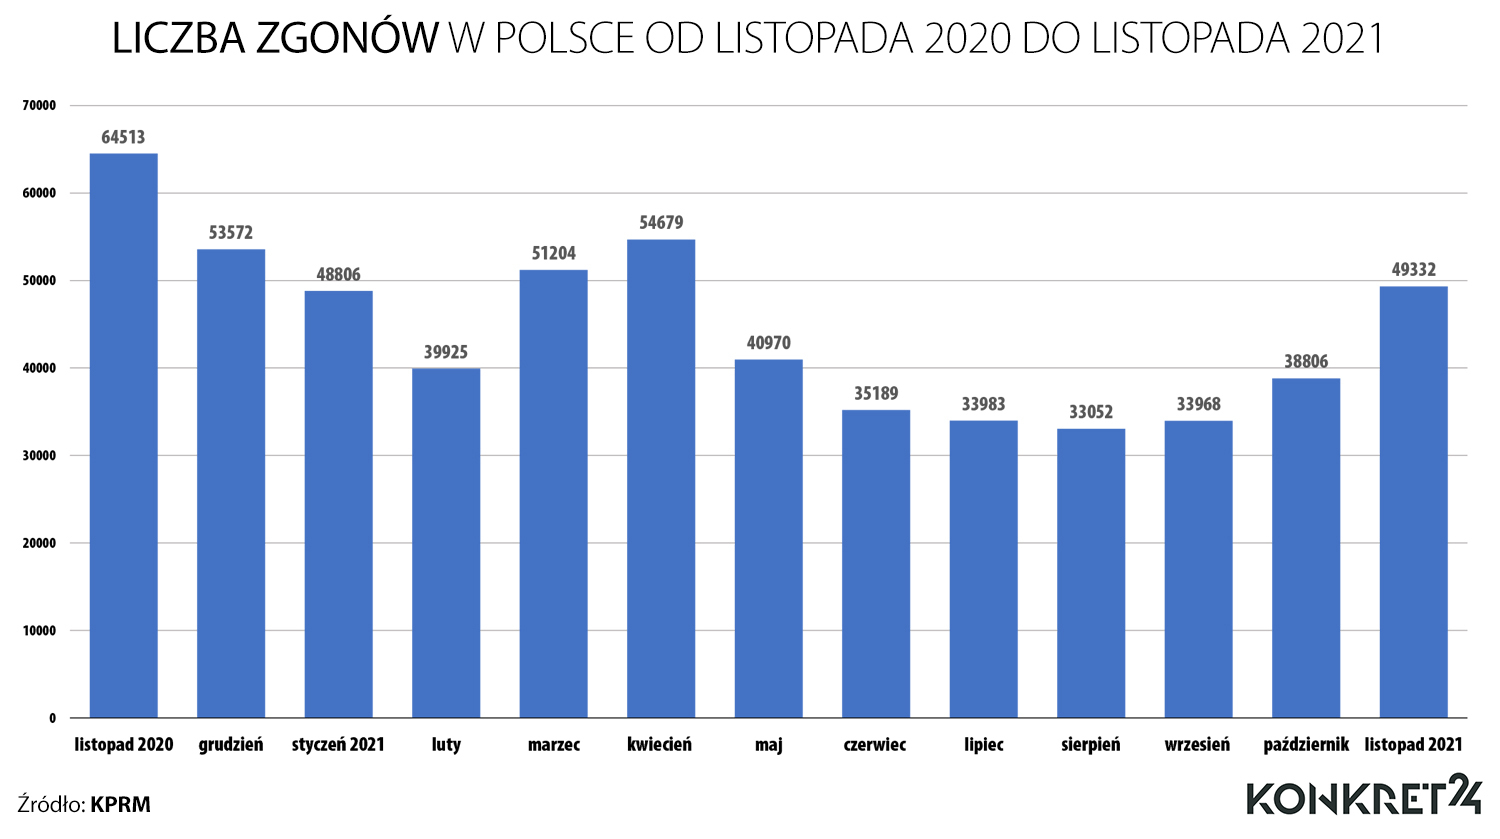 Number of deaths in Poland from November 2020 to November 2021